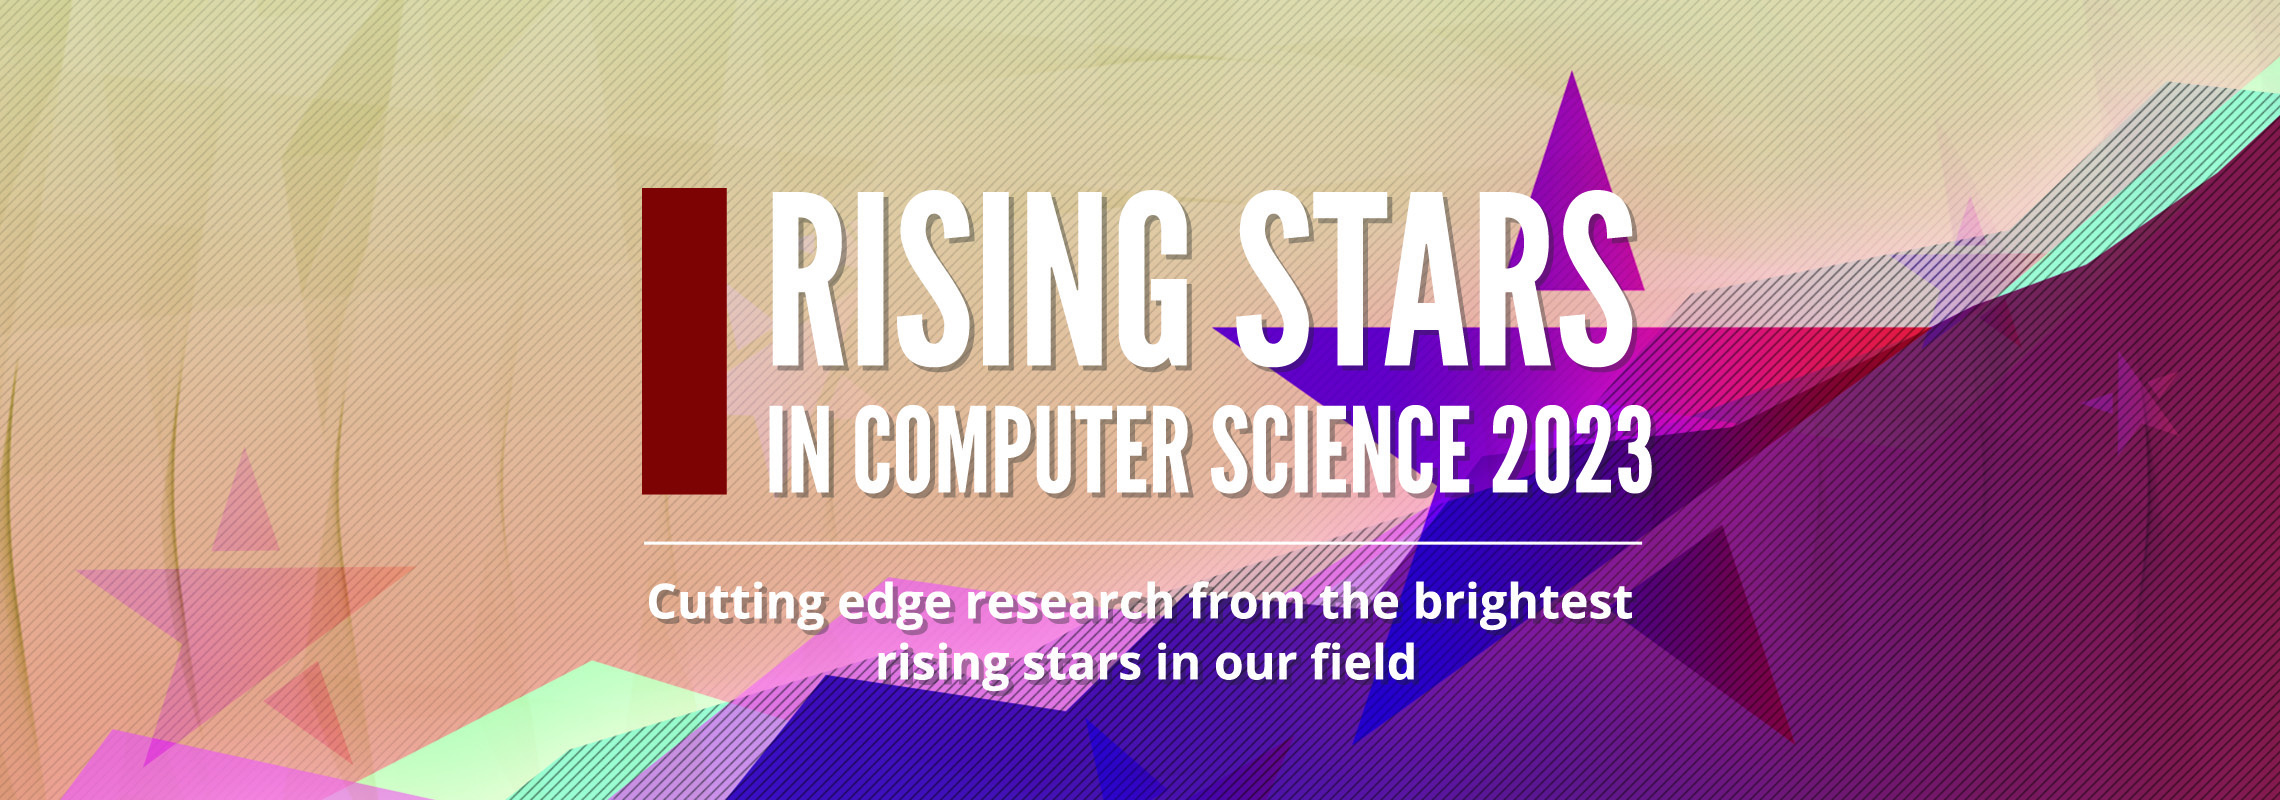 Rising Stars in Computer Science 2023: Cutting edge research from the brightest rising stars in our field